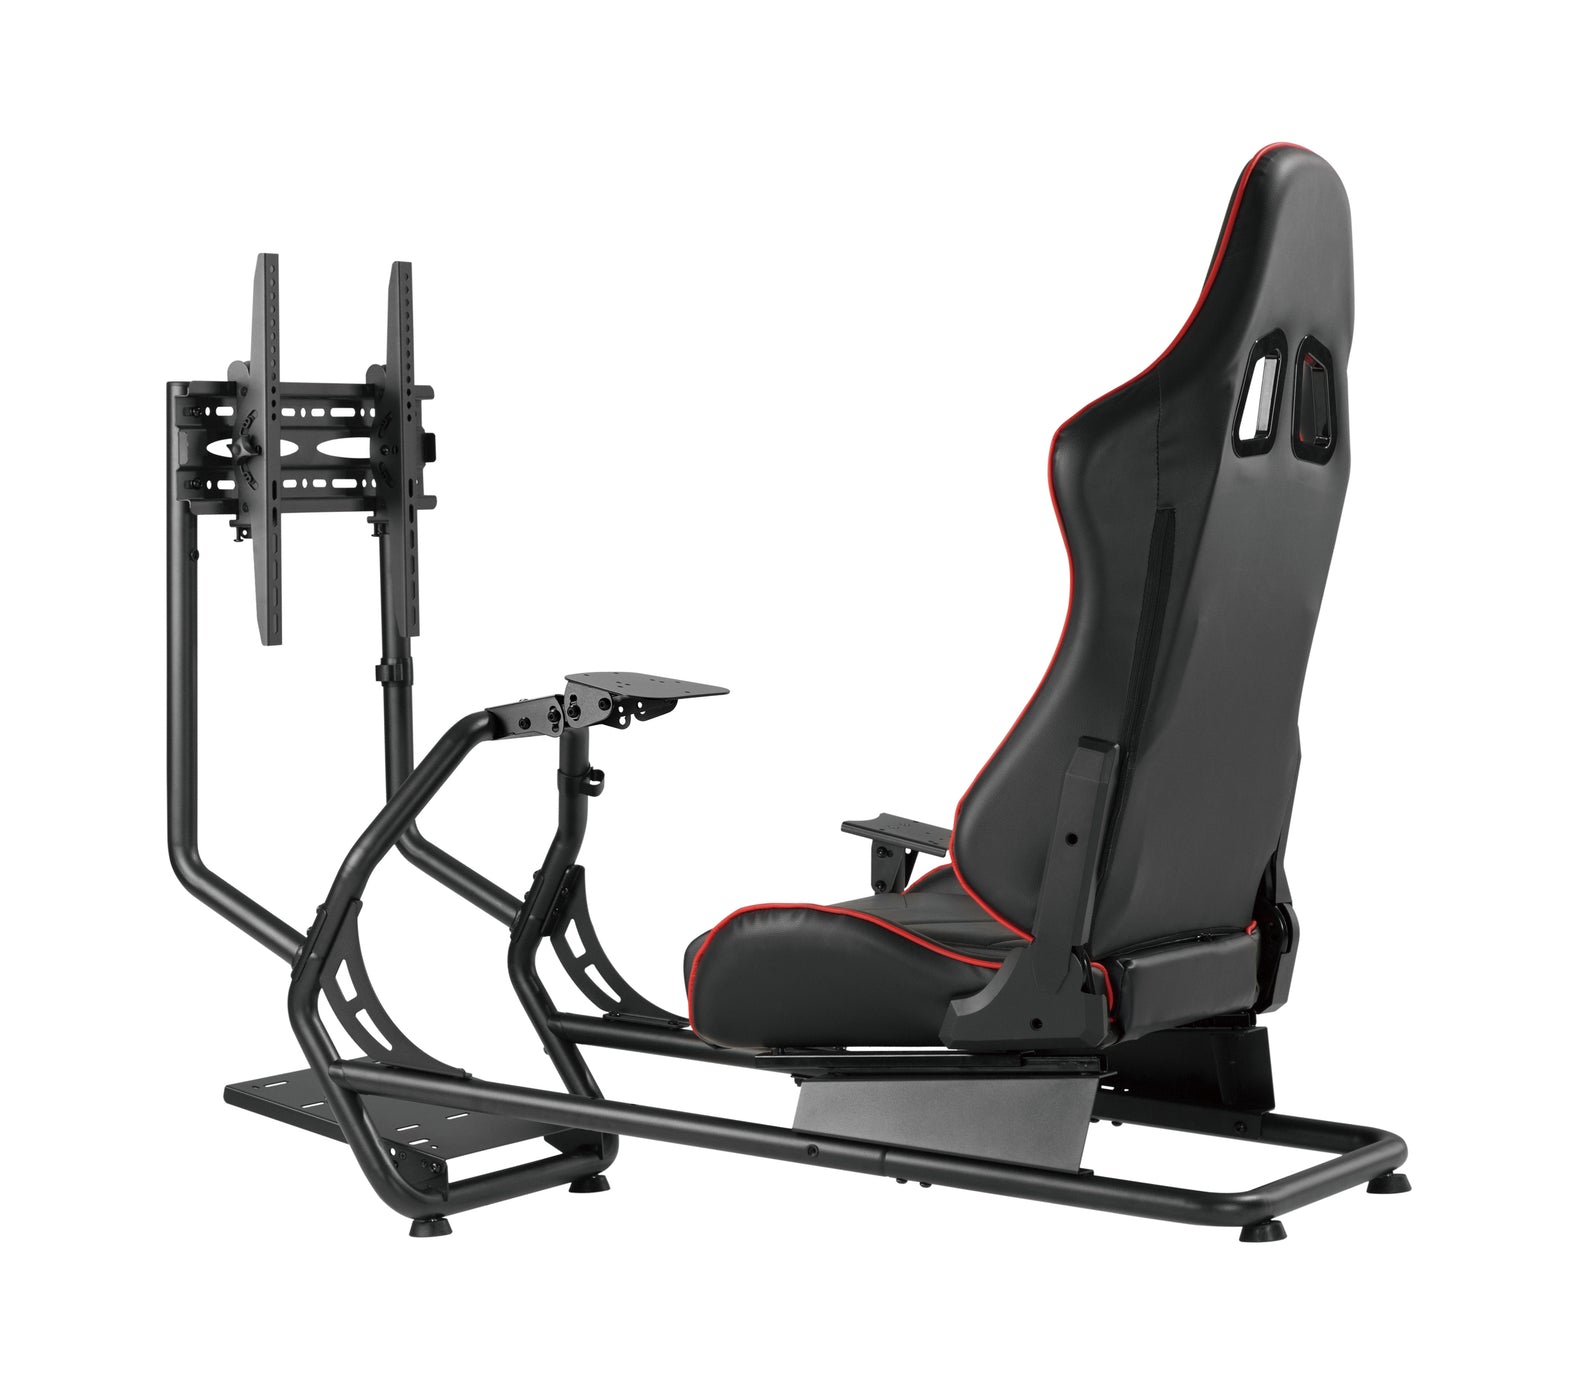 The Ultimate Racing Cockpit - 25% off